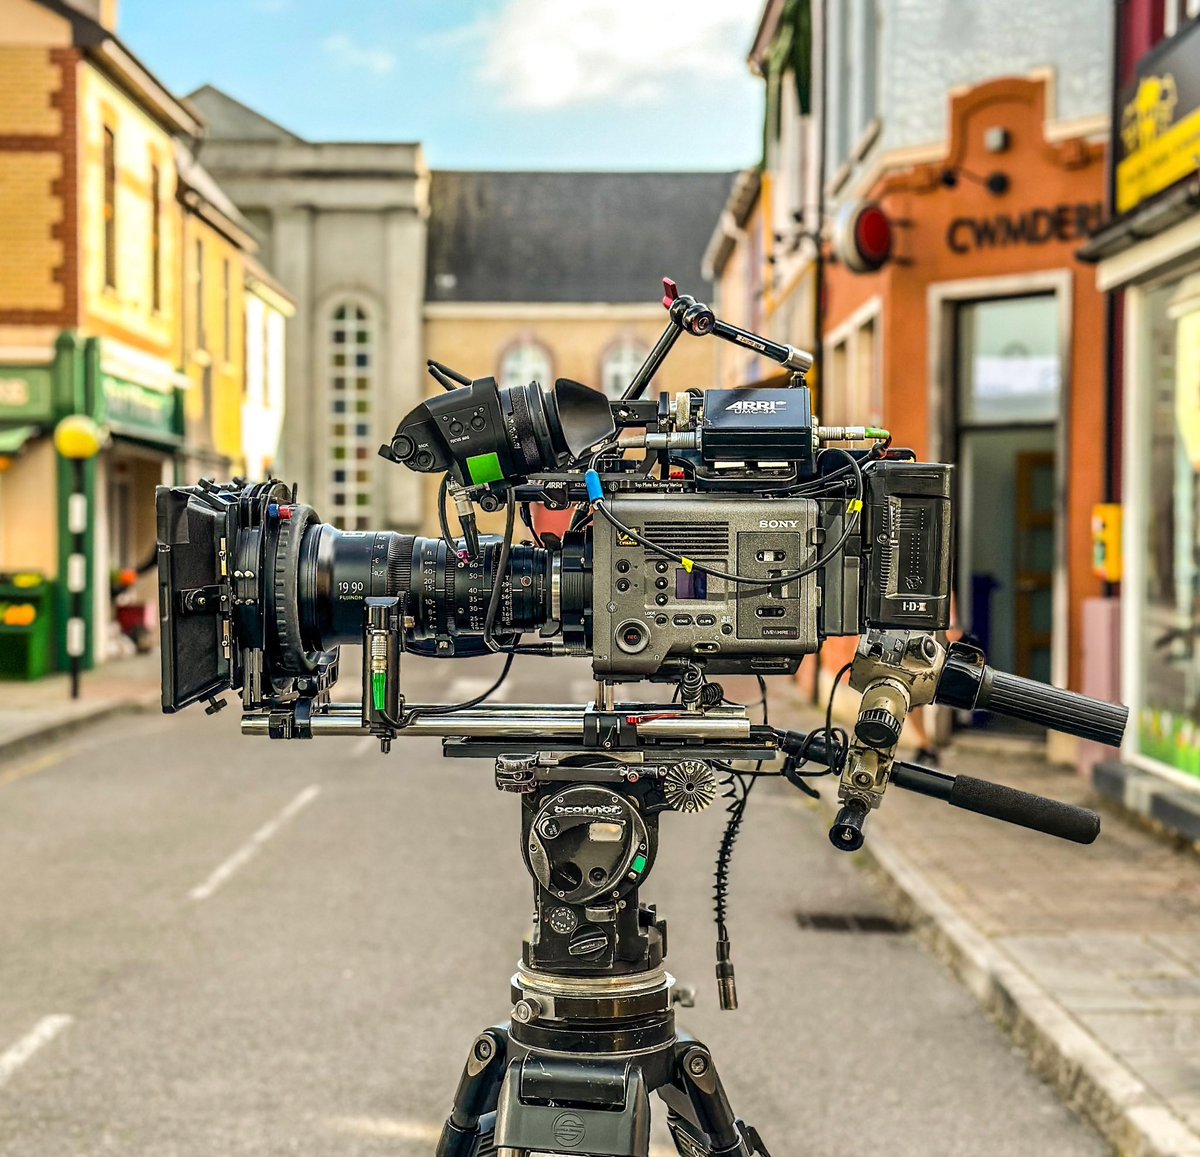 Lovely couple of days filming on Pobol y Cwm. 
Thanks to the fantastic cast and crew for making me feel so welcome. 😄🎥🎬📺
.
.
.
.
.
.
.
#cameraoperator #cameraman #lightingcameraman #pobolycwm #soap #sonyvenice